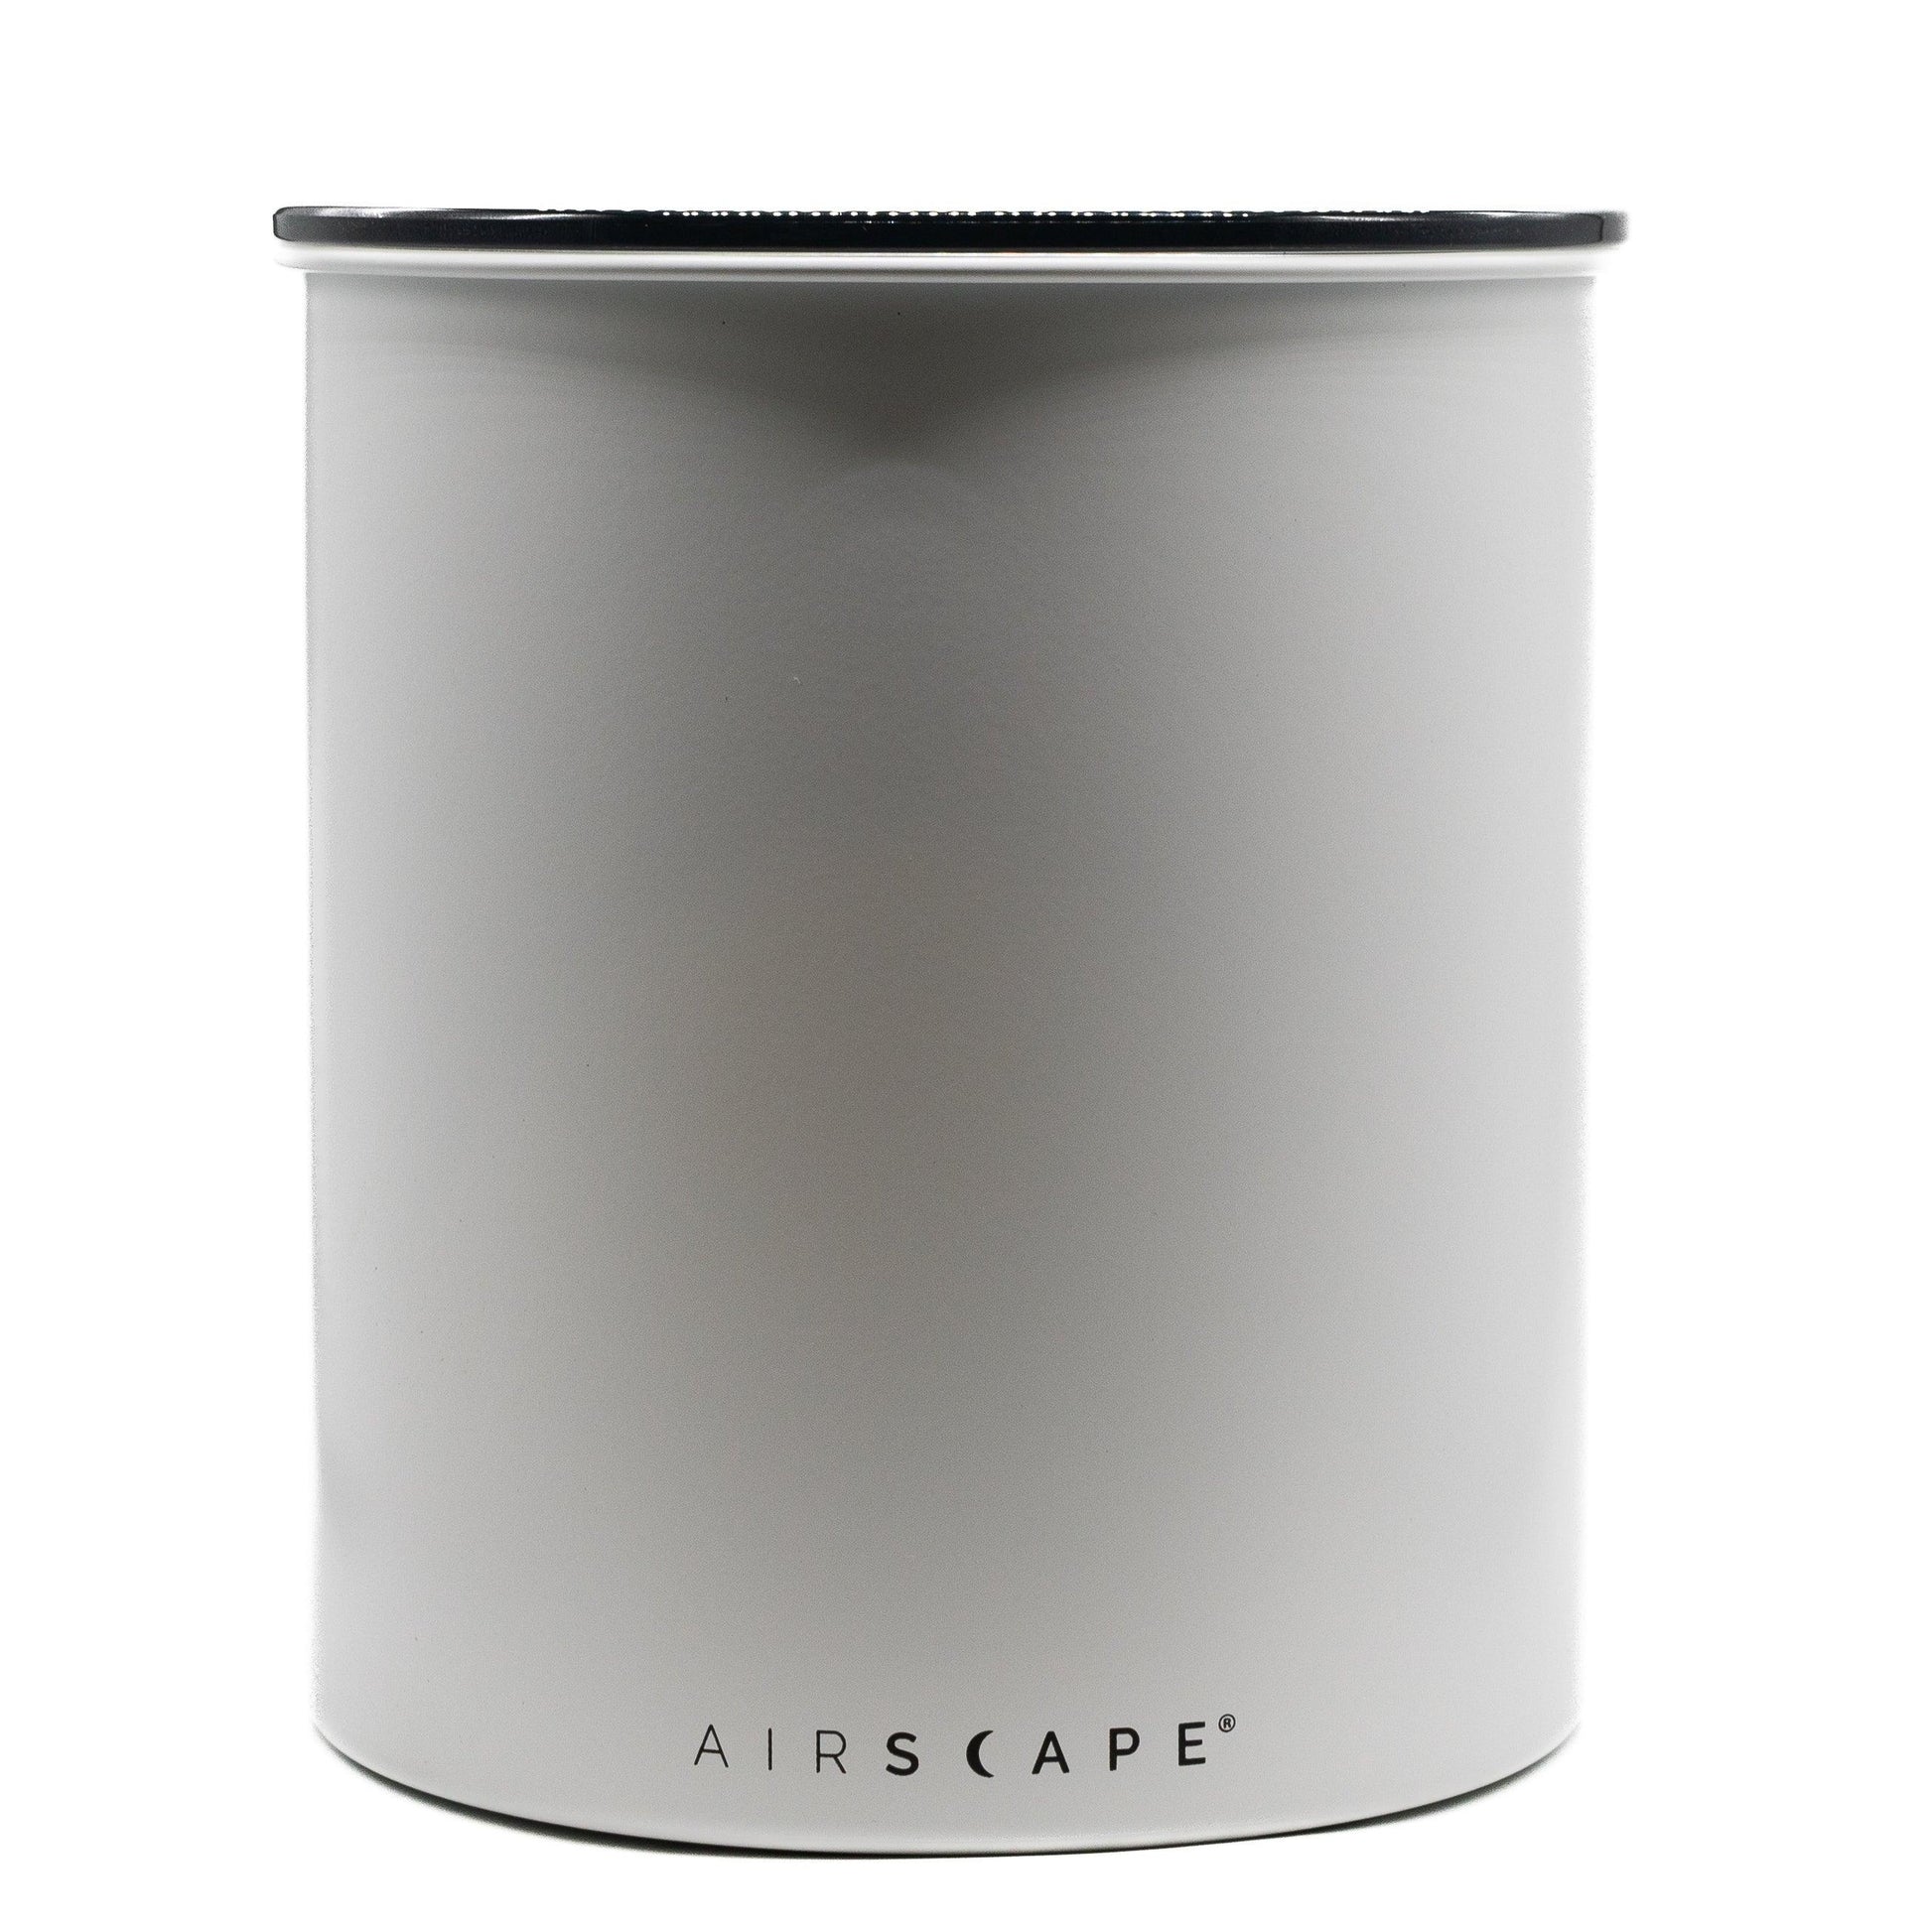 Airscape Kilo 8" Large Coffee Canister + 500g of The OG Coffee - dhc coffee co.